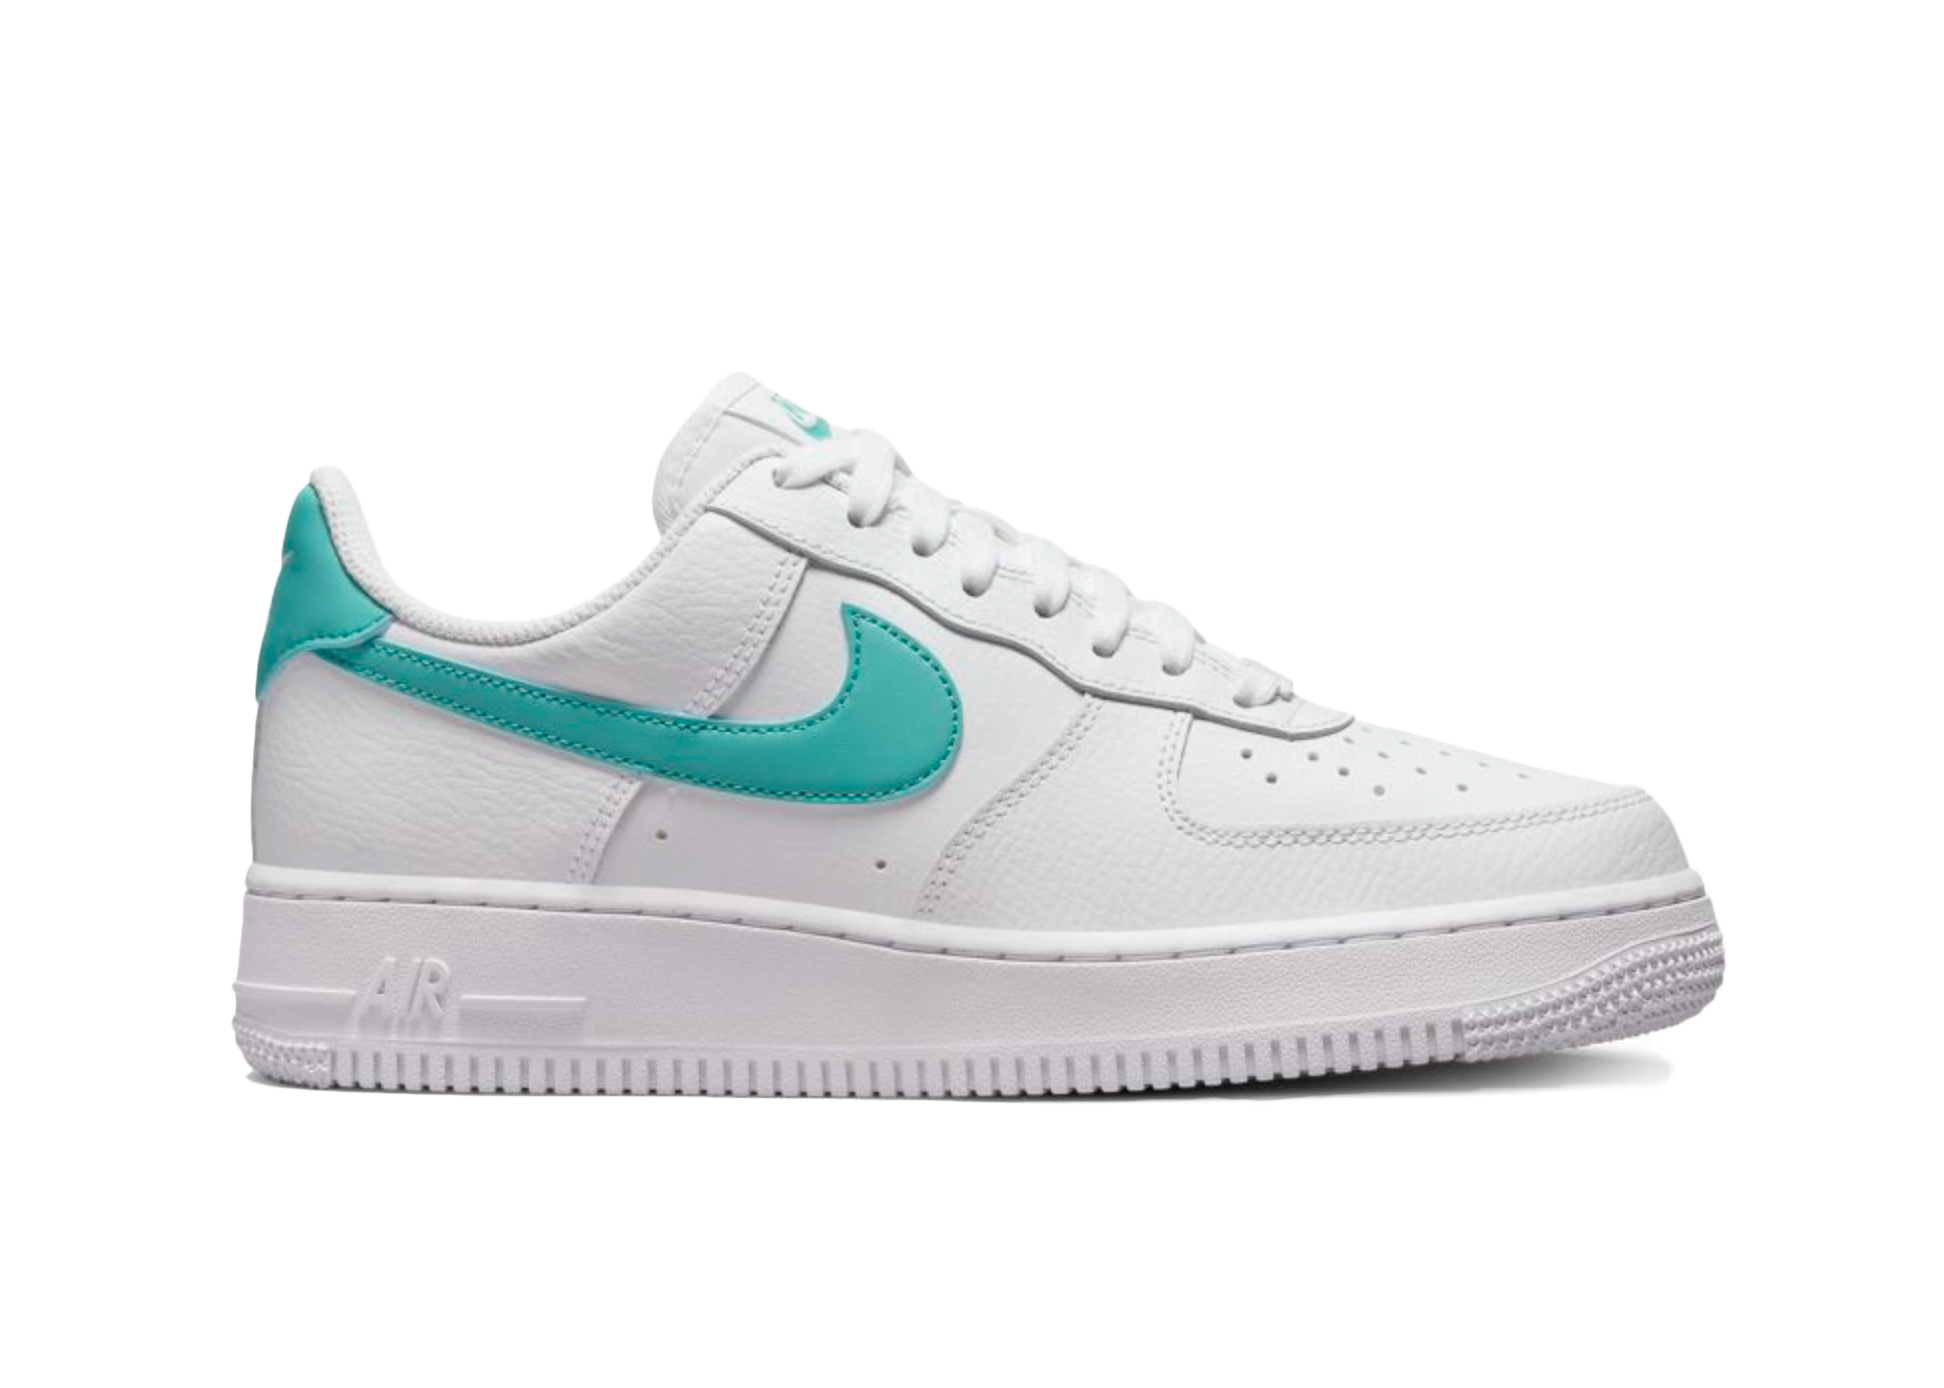 teal and white air force ones